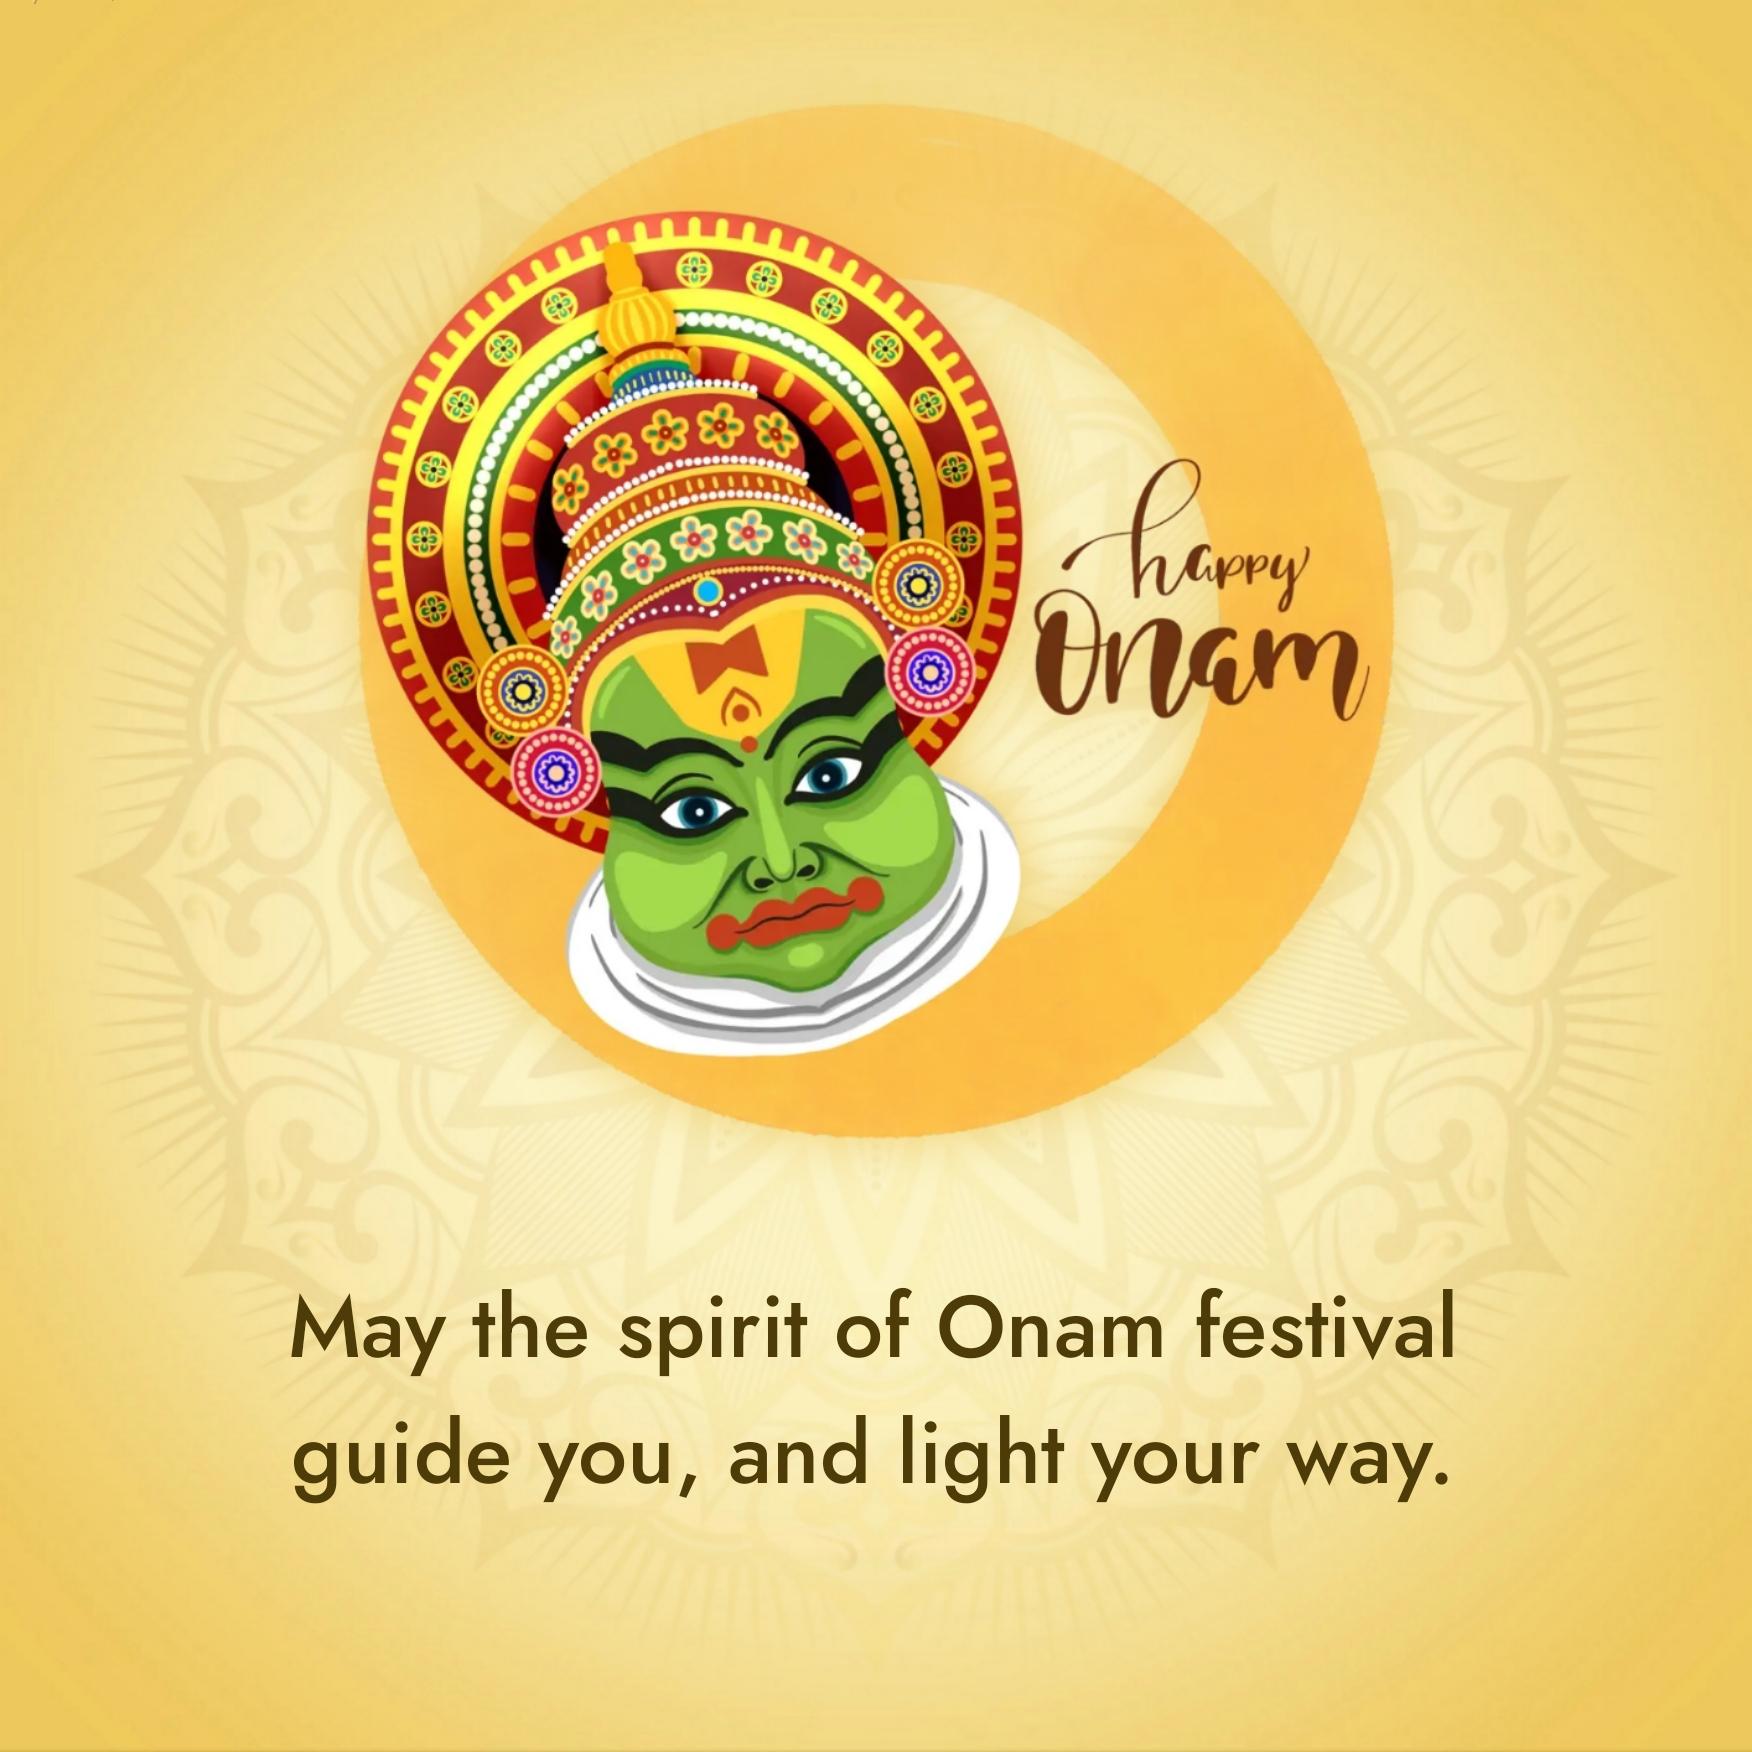 May the spirit of Onam festival guide you and light your way